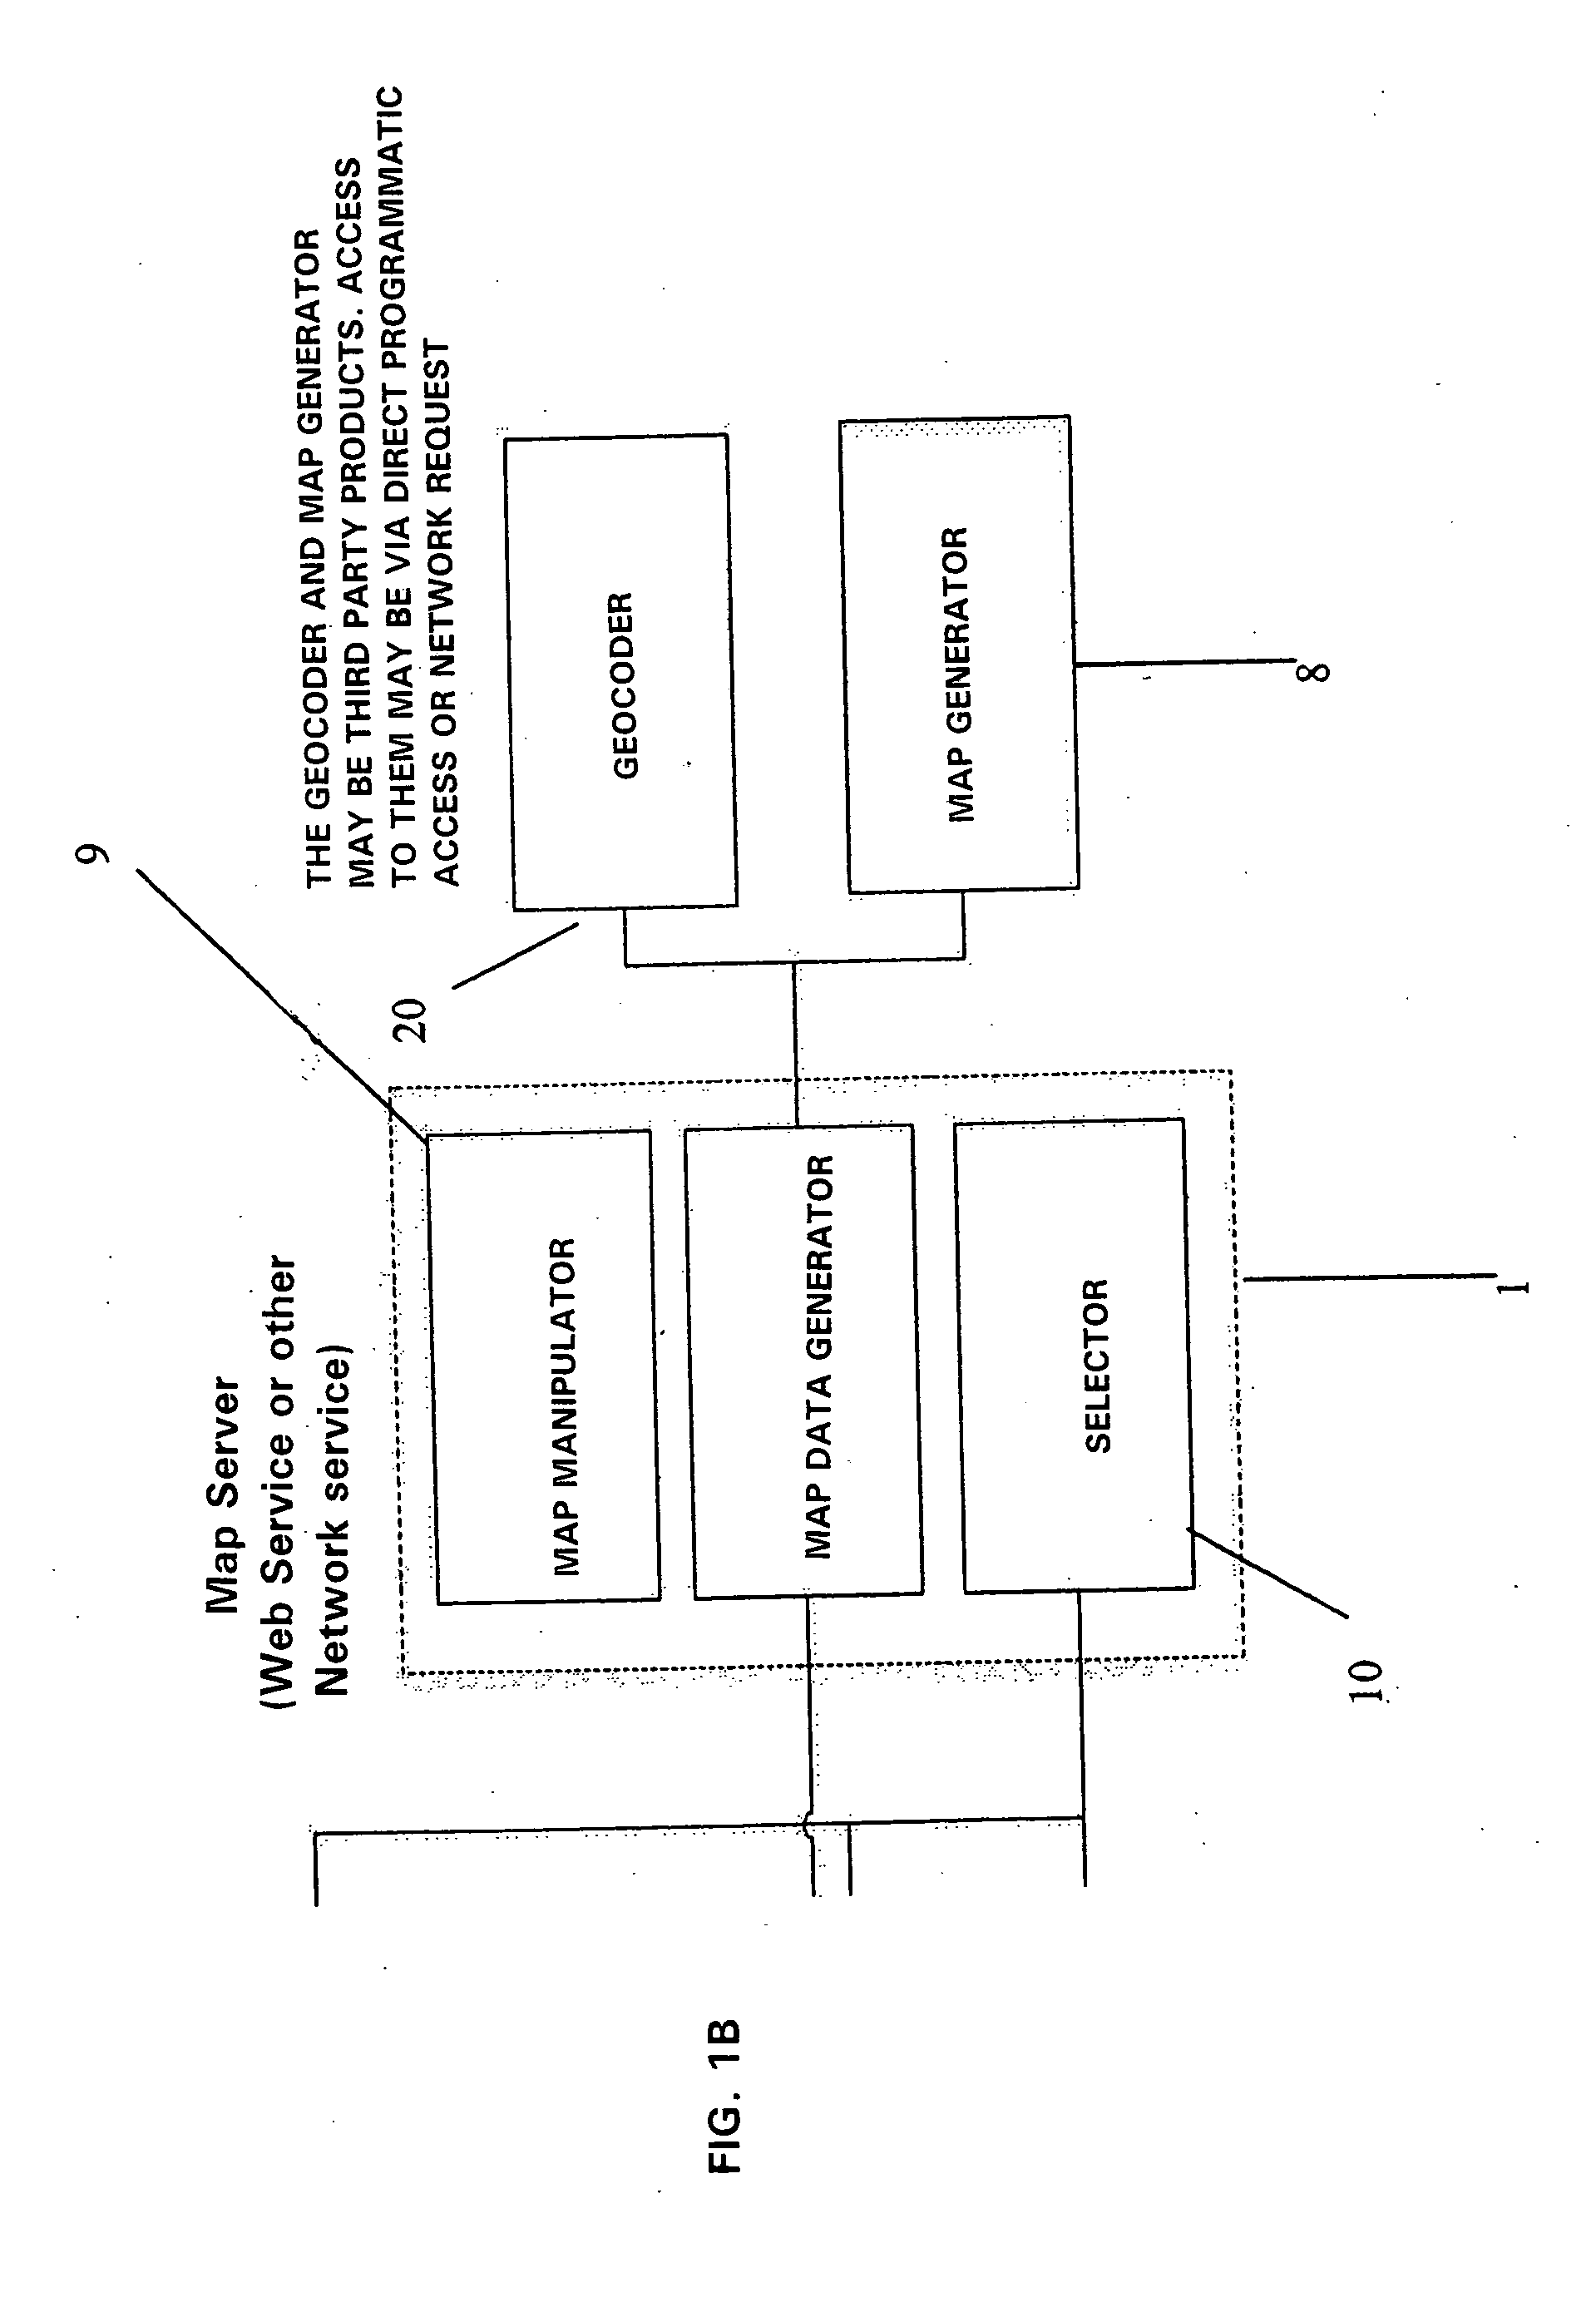 System and method for representation of business information